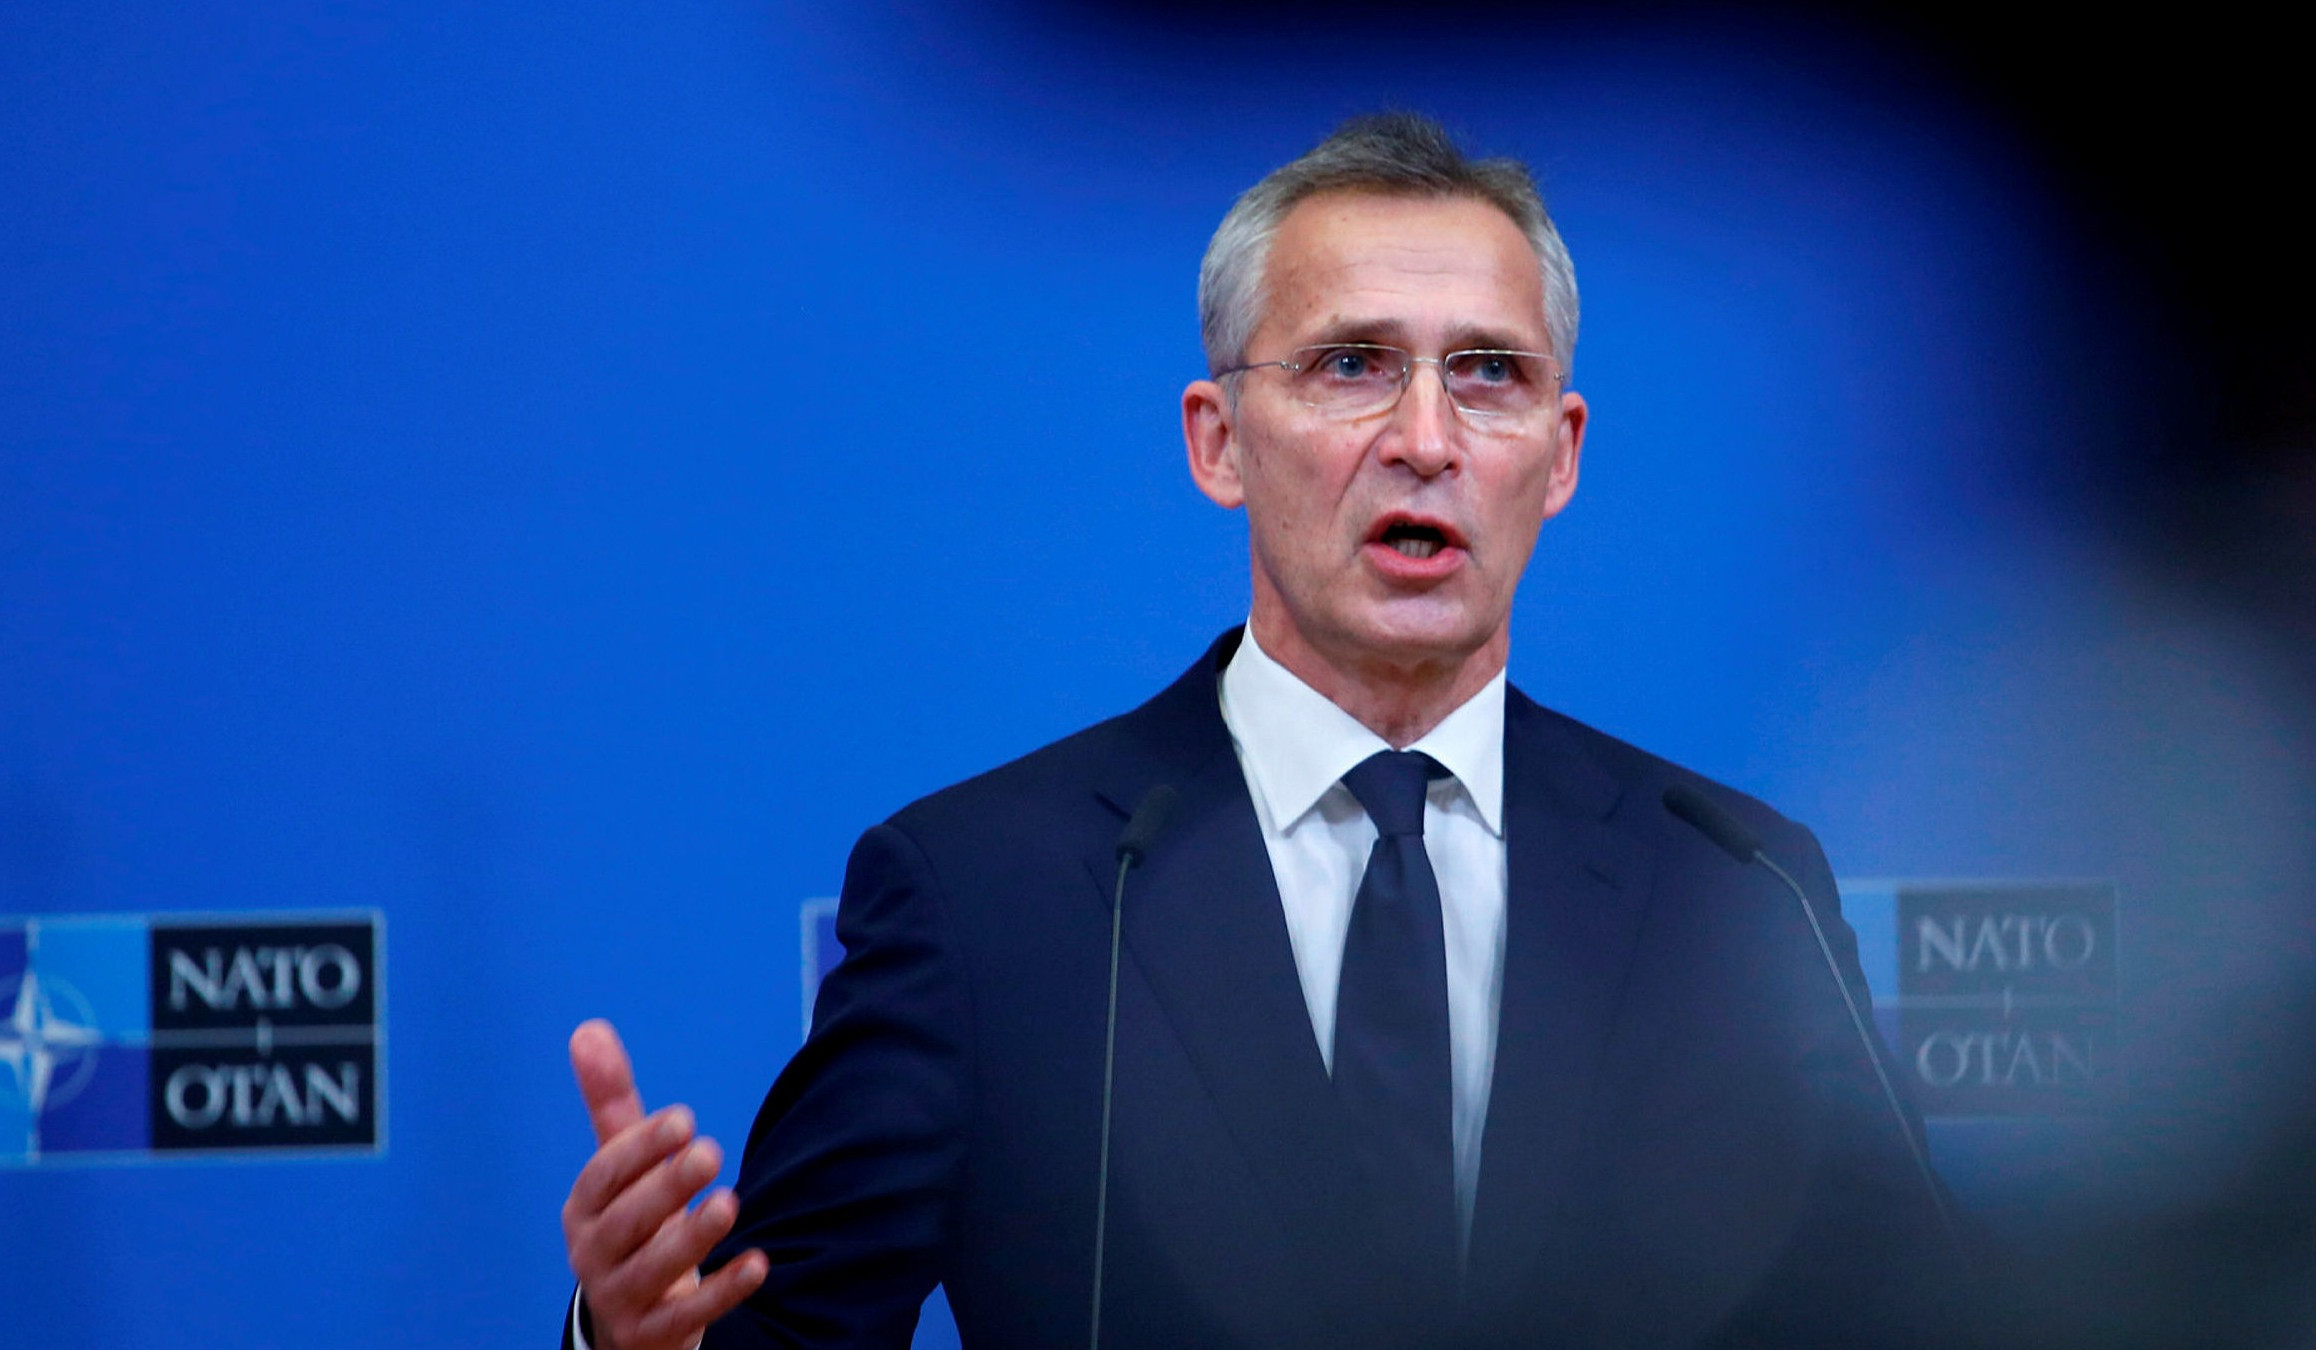 Agenda of Stoltenberg's visit to South Caucasus known